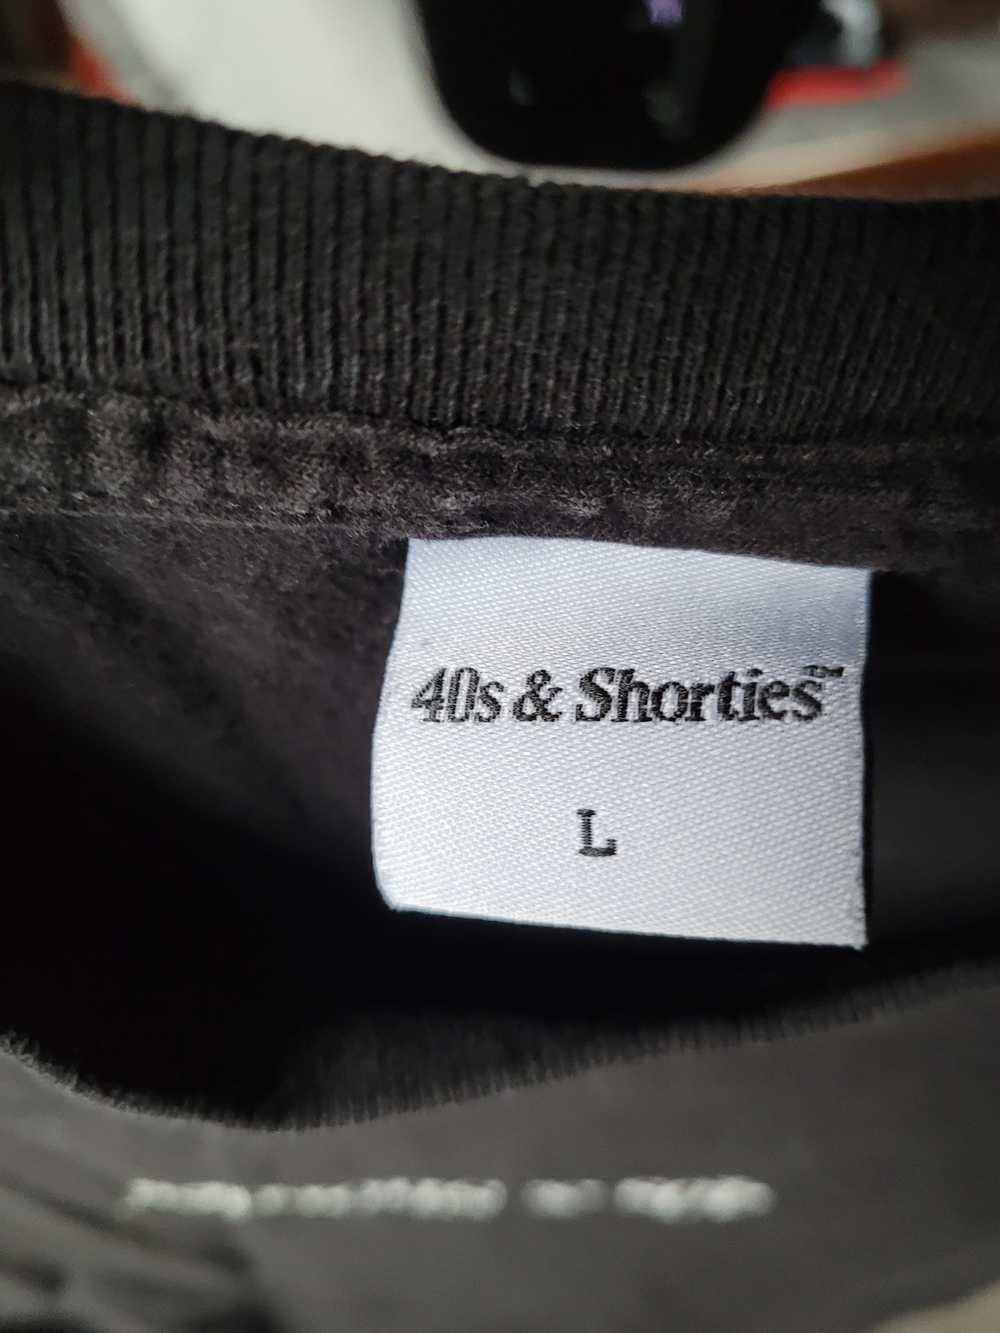 40's & Shorties Distressed 40s and shorties tee - image 3